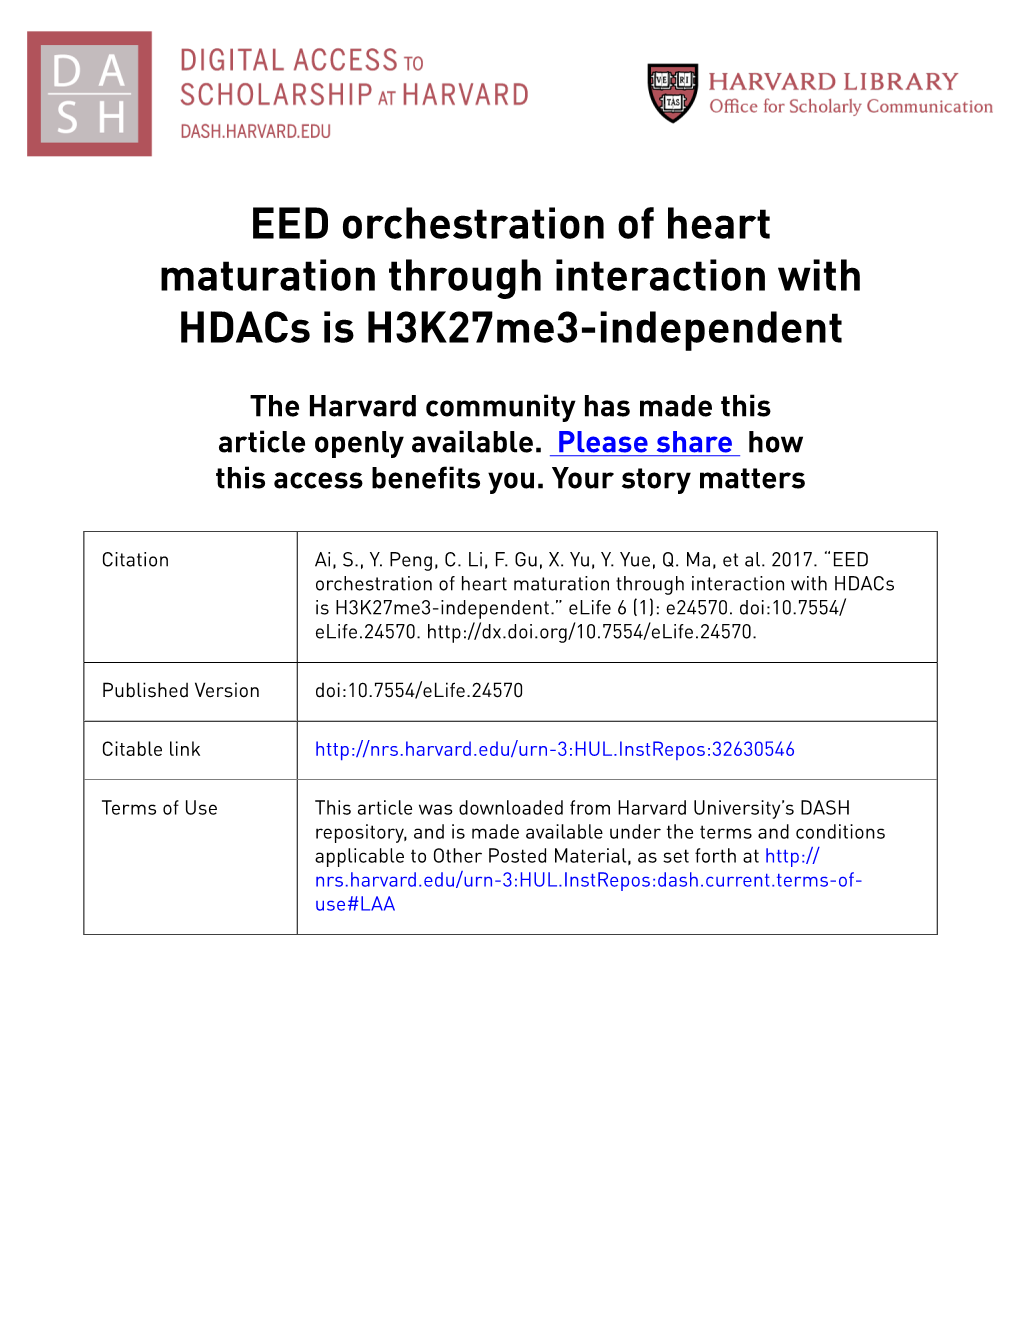 EED Orchestration of Heart Maturation Through Interaction with Hdacs Is H3k27me3-Independent